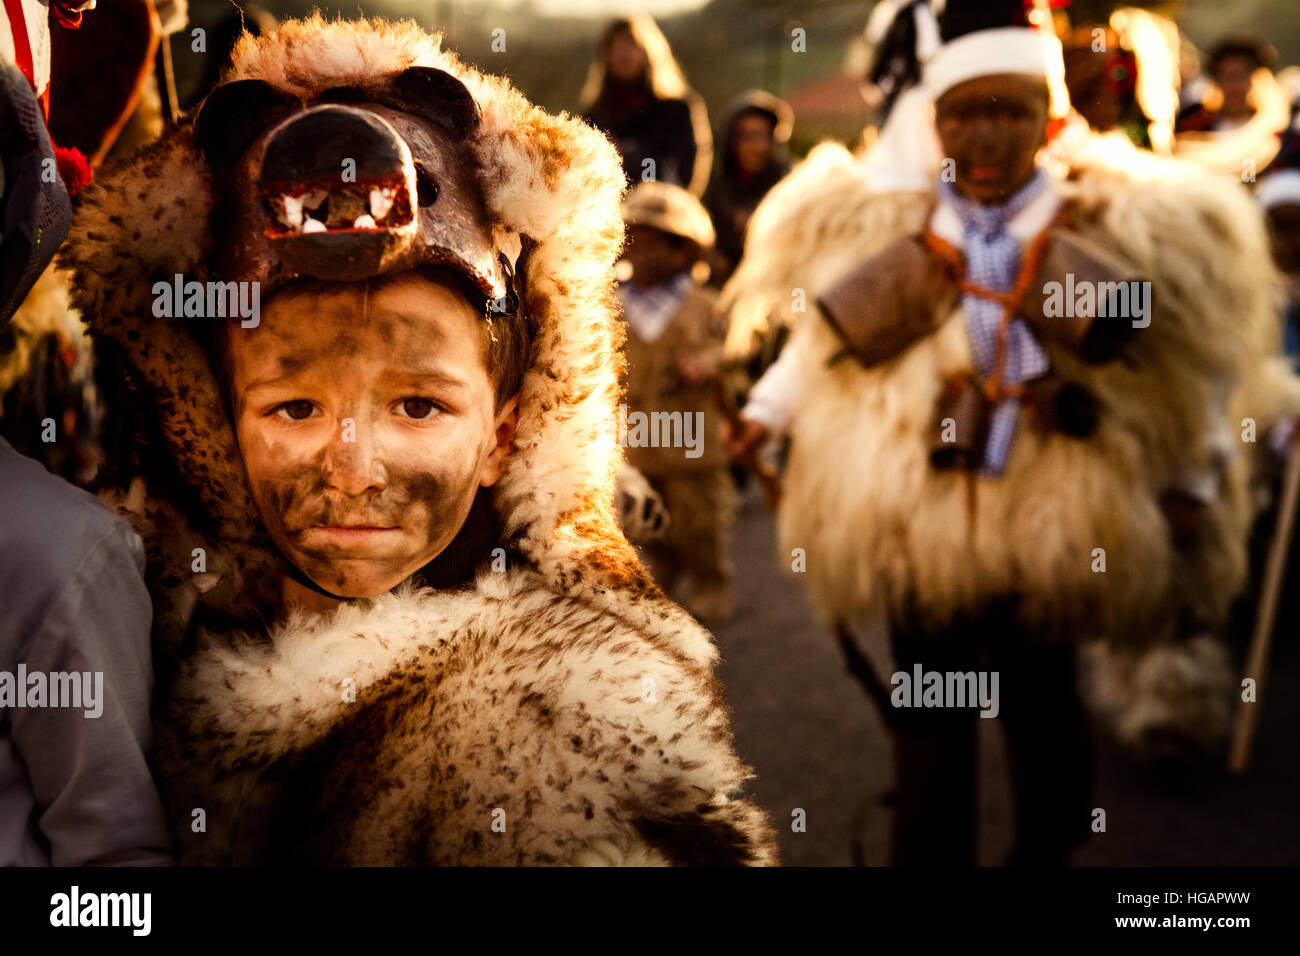 Silio, Spain. 7th January, 2017. La Vijanera takes place every year in a small town of less than 600 habitants. Locals dress up as various characters and dance and parade through the village streets. © Tom Bourdon/Alamy Live News Stock Photo